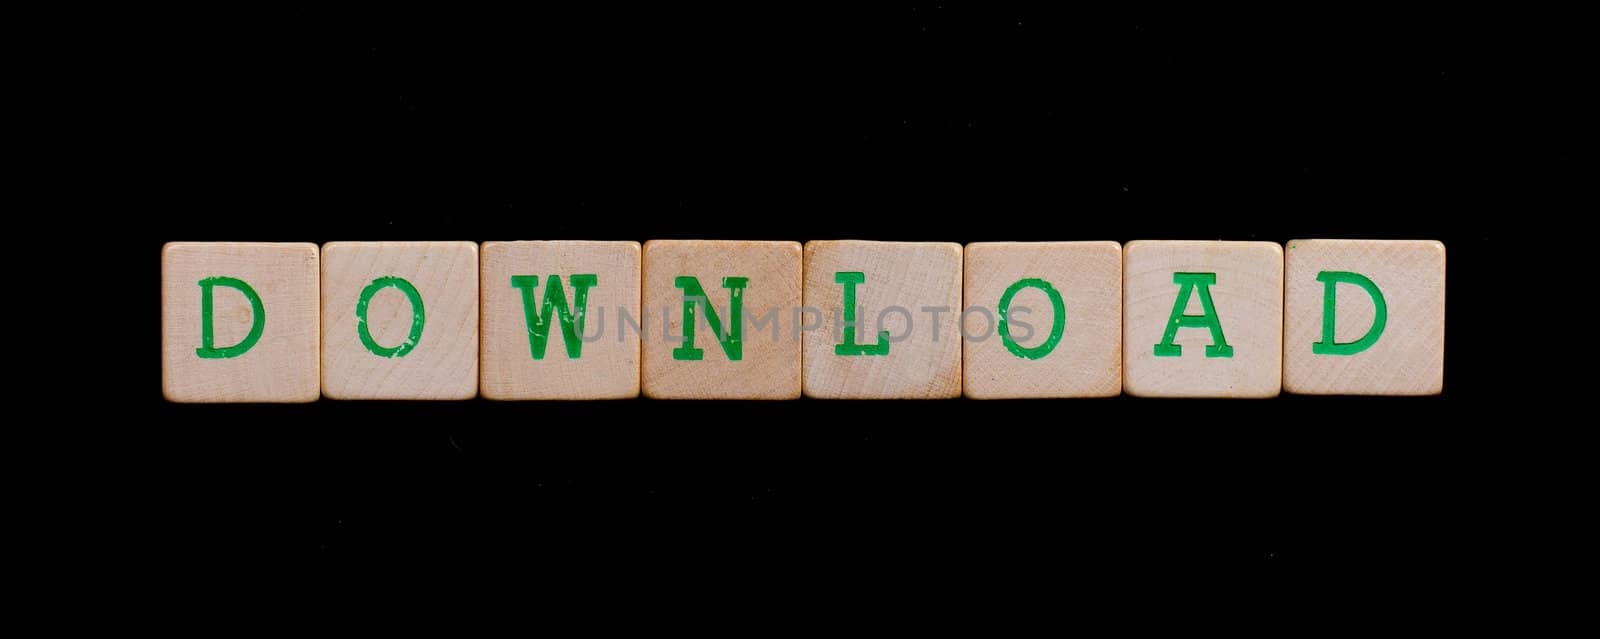 Green letters on old wooden blocks (download)